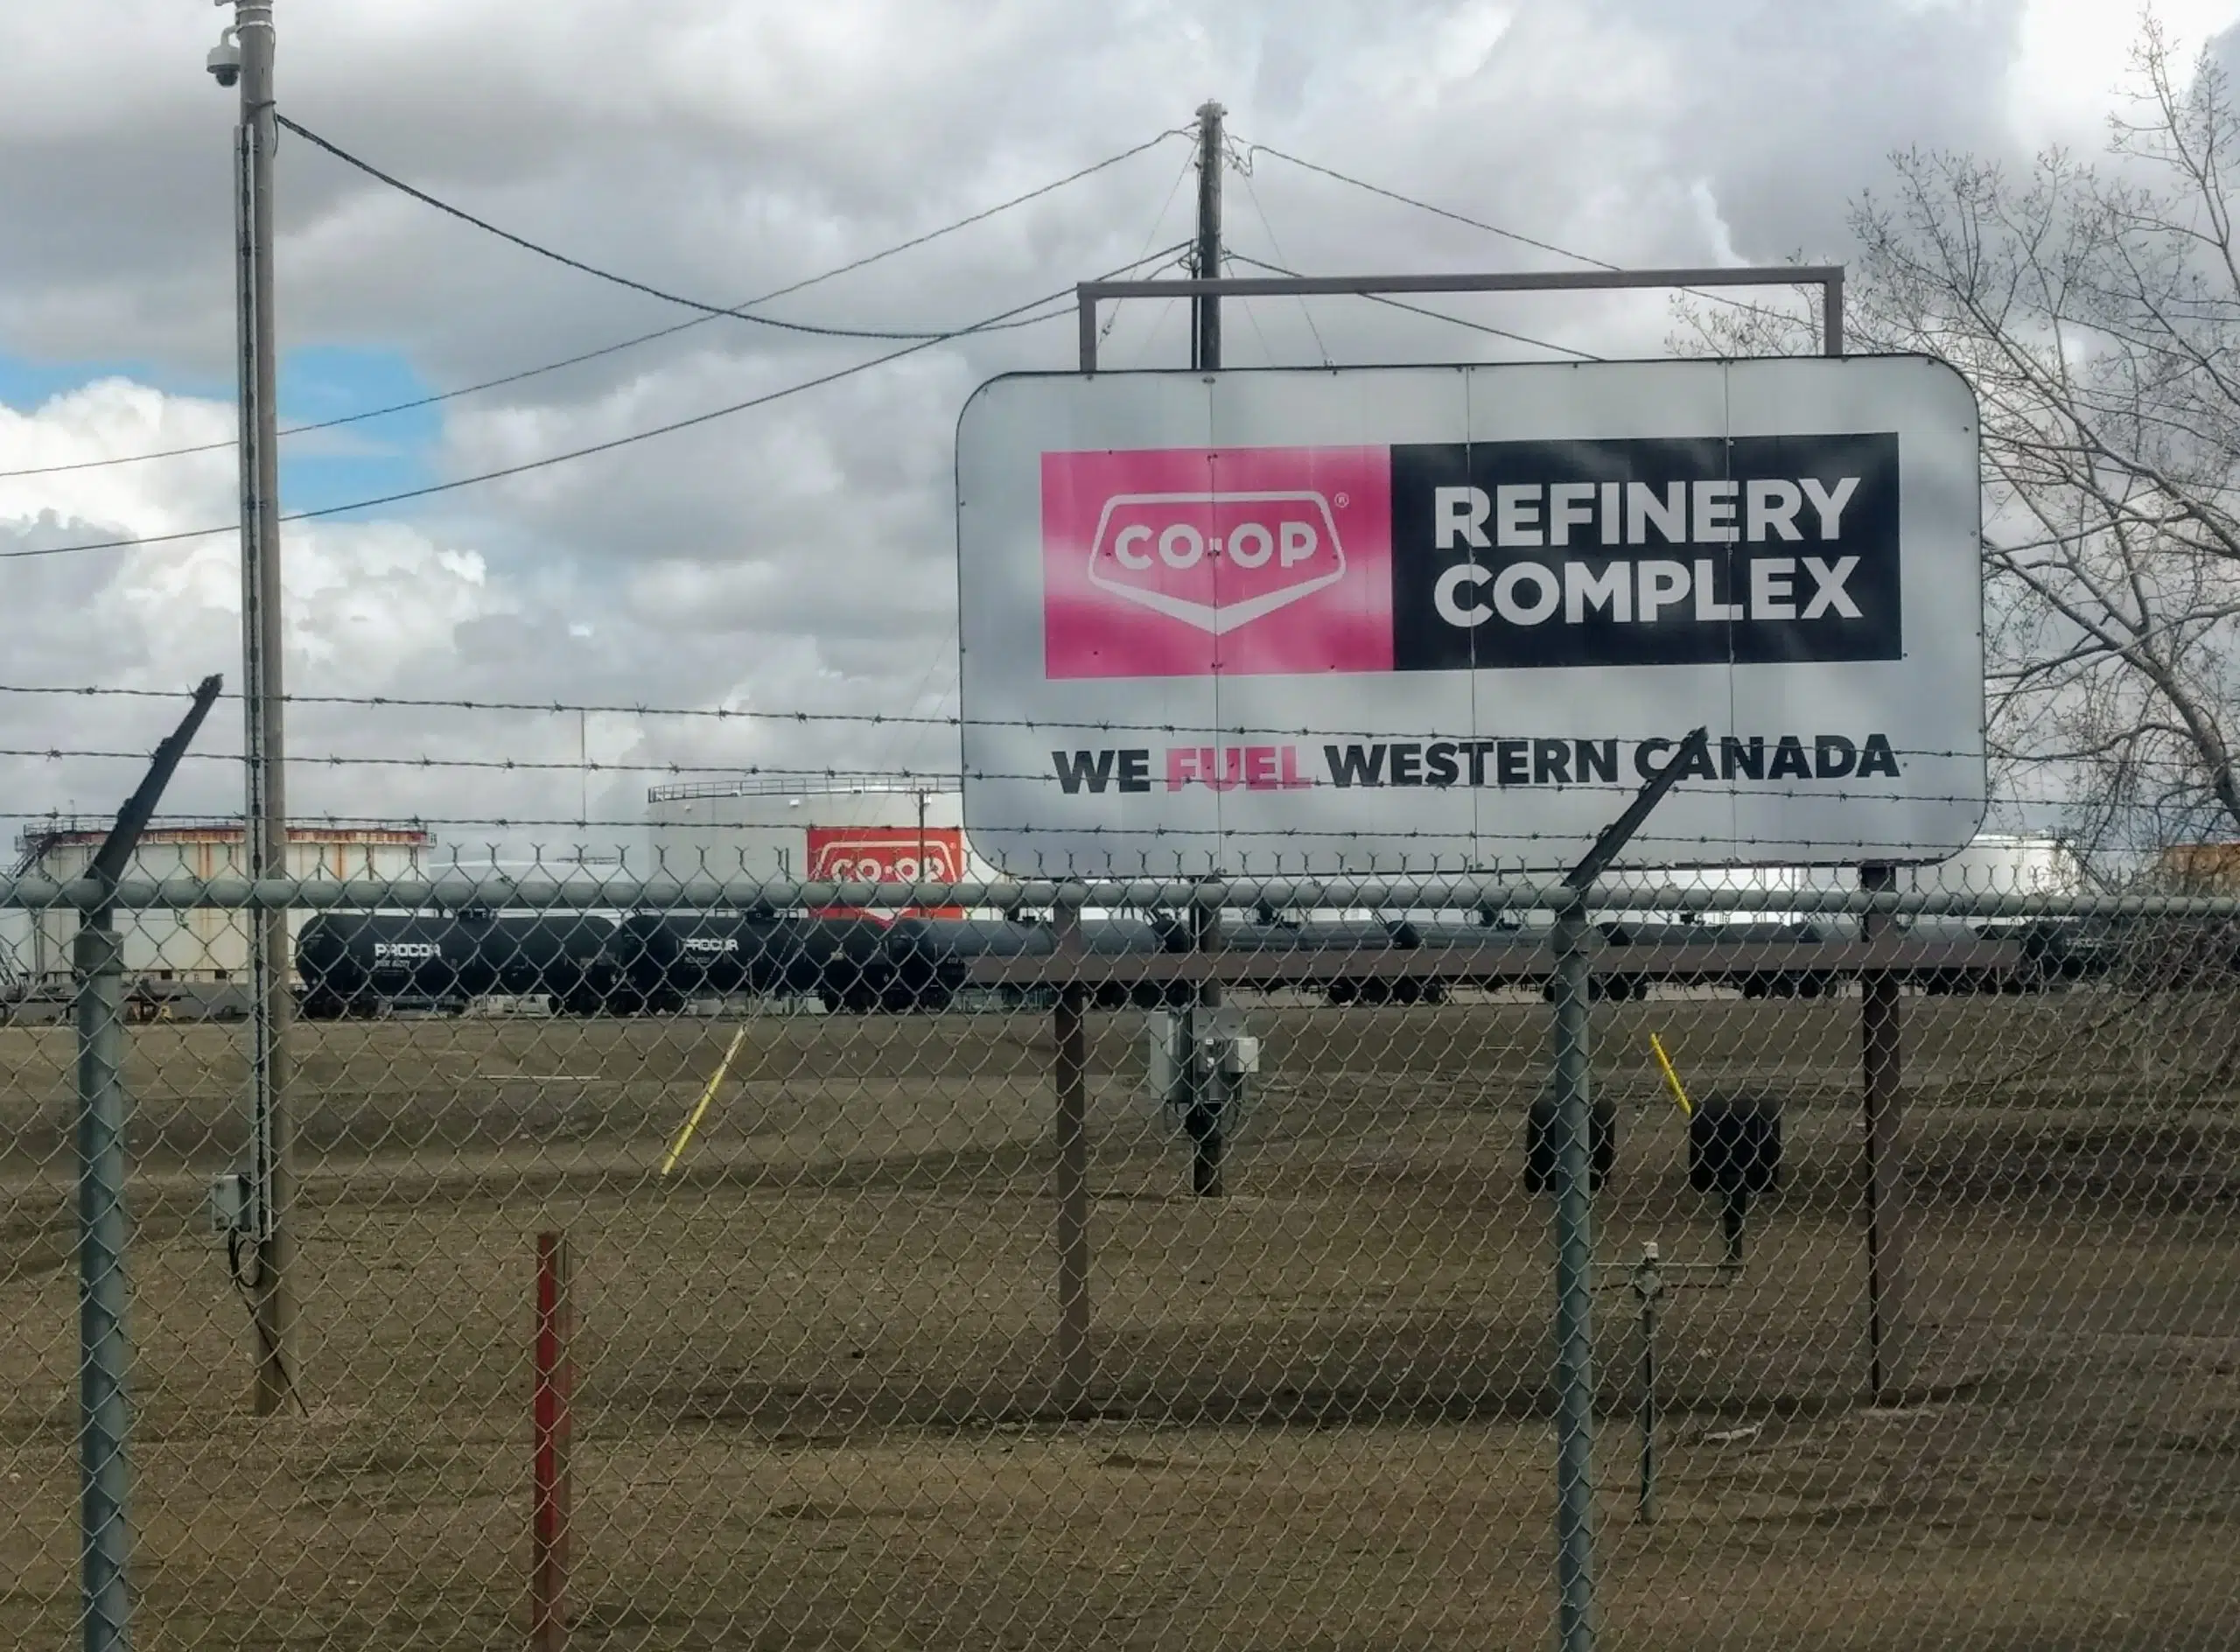 Co-op refinery to lay off more than 50 employees over next 6 months